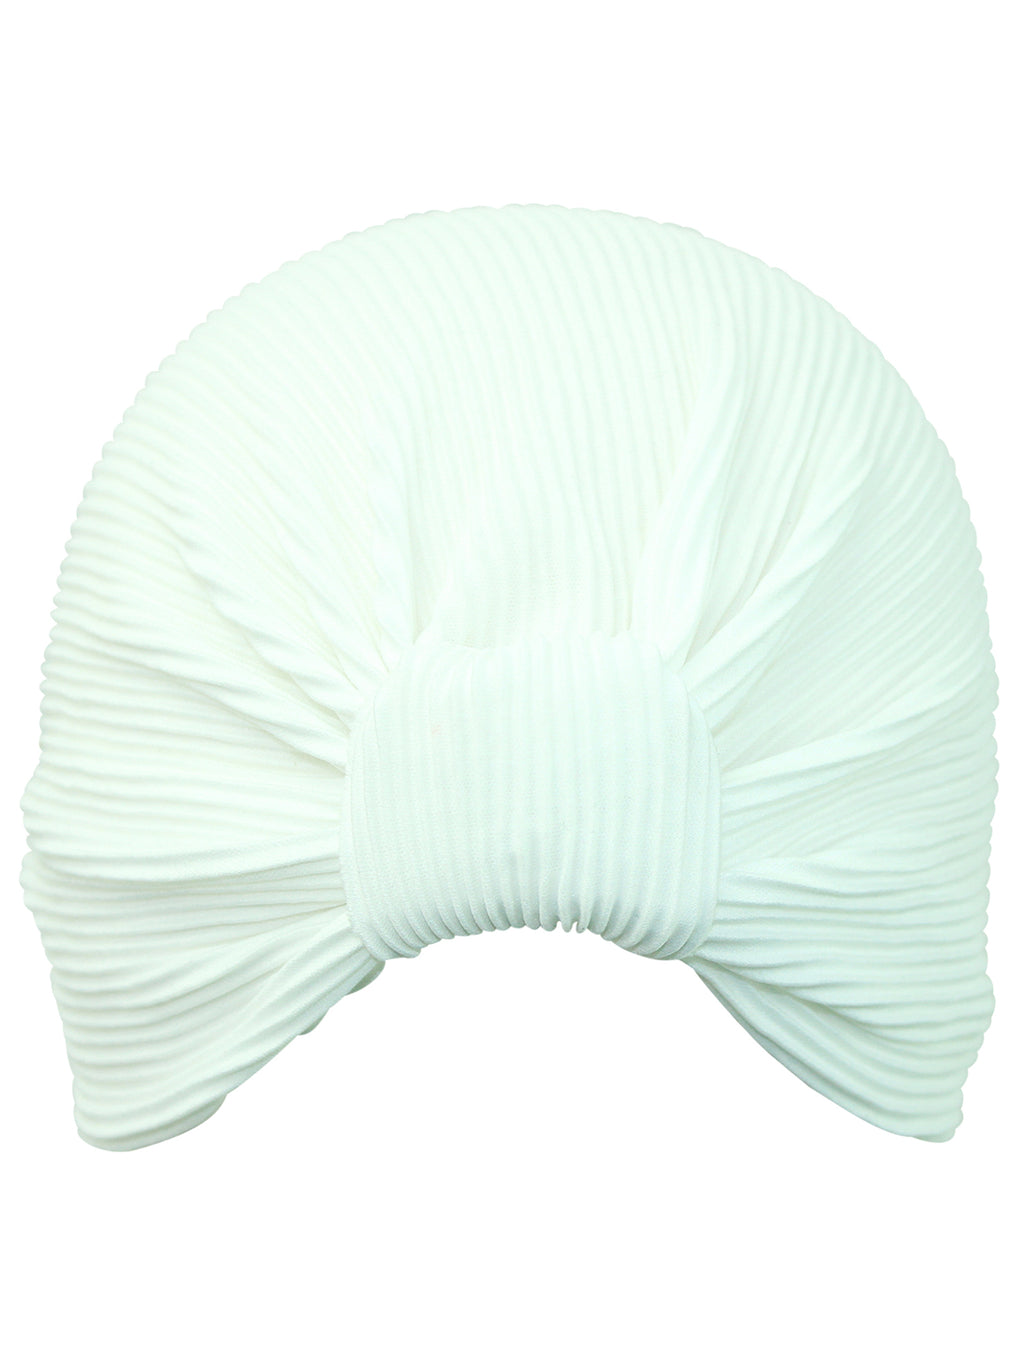 Thin Pleated Polyester Turban Head Wrap For Women